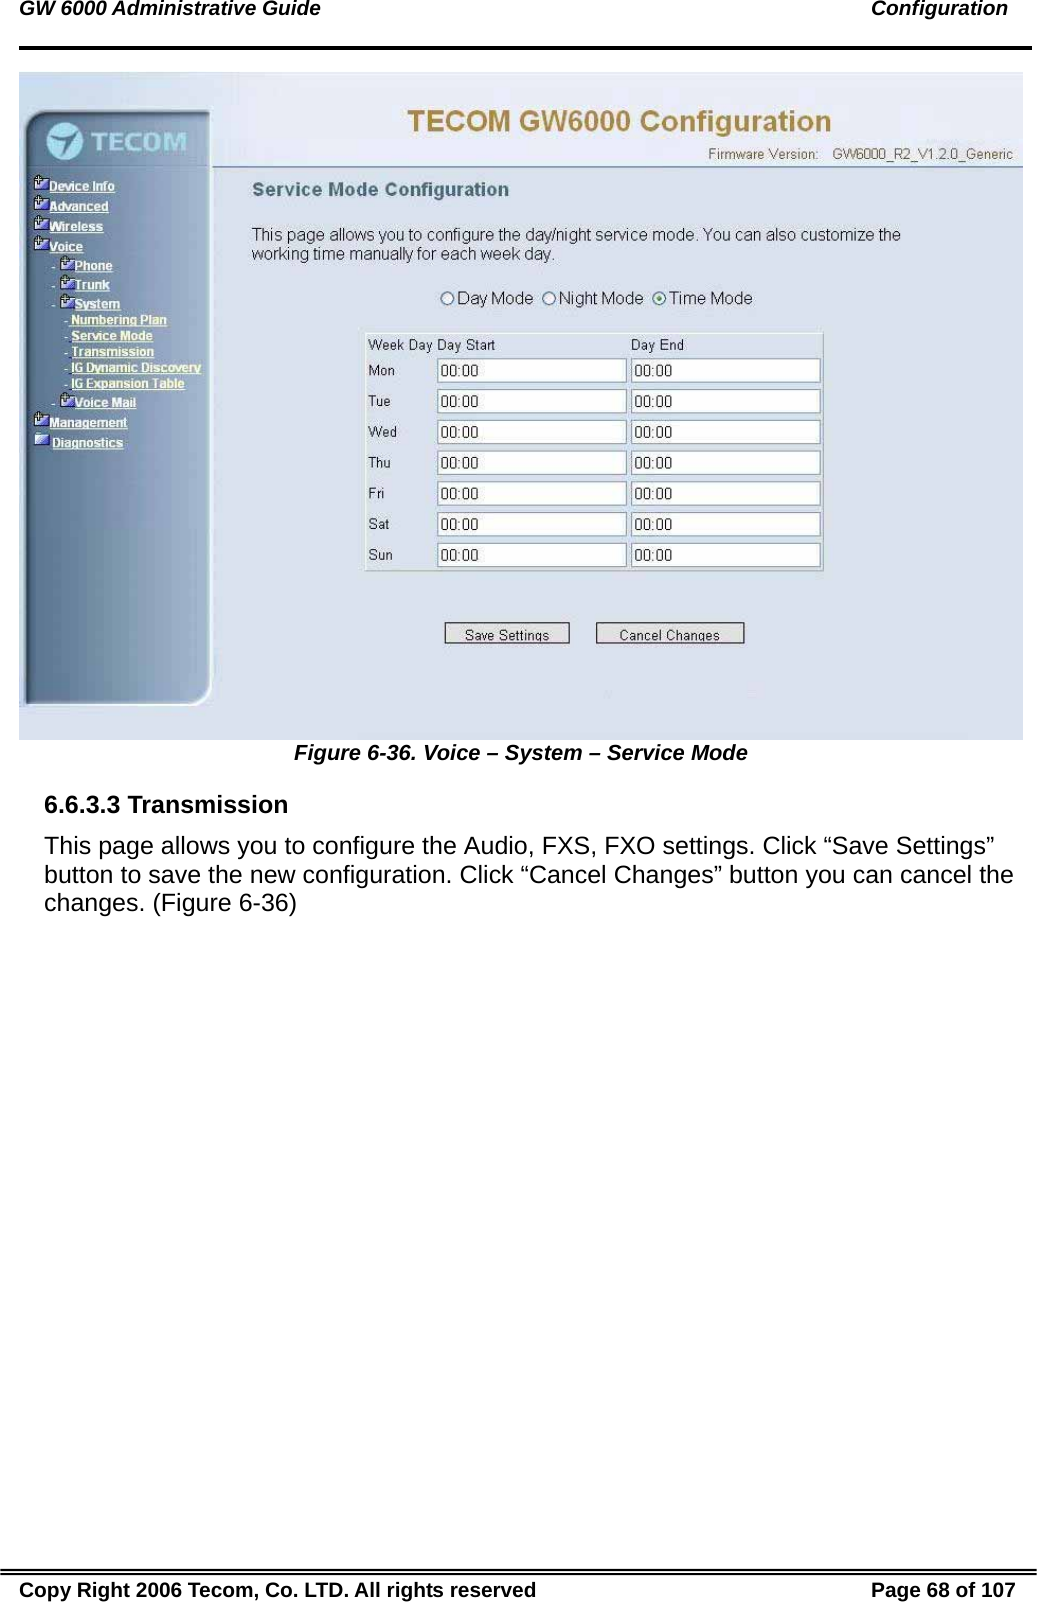 GW 6000 Administrative Guide                                                                                               Configuration  Figure 6-36. Voice – System – Service Mode 6.6.3.3 Transmission This page allows you to configure the Audio, FXS, FXO settings. Click “Save Settings” button to save the new configuration. Click “Cancel Changes” button you can cancel the changes. (Figure 6-36) Copy Right 2006 Tecom, Co. LTD. All rights reserved  Page 68 of 107 